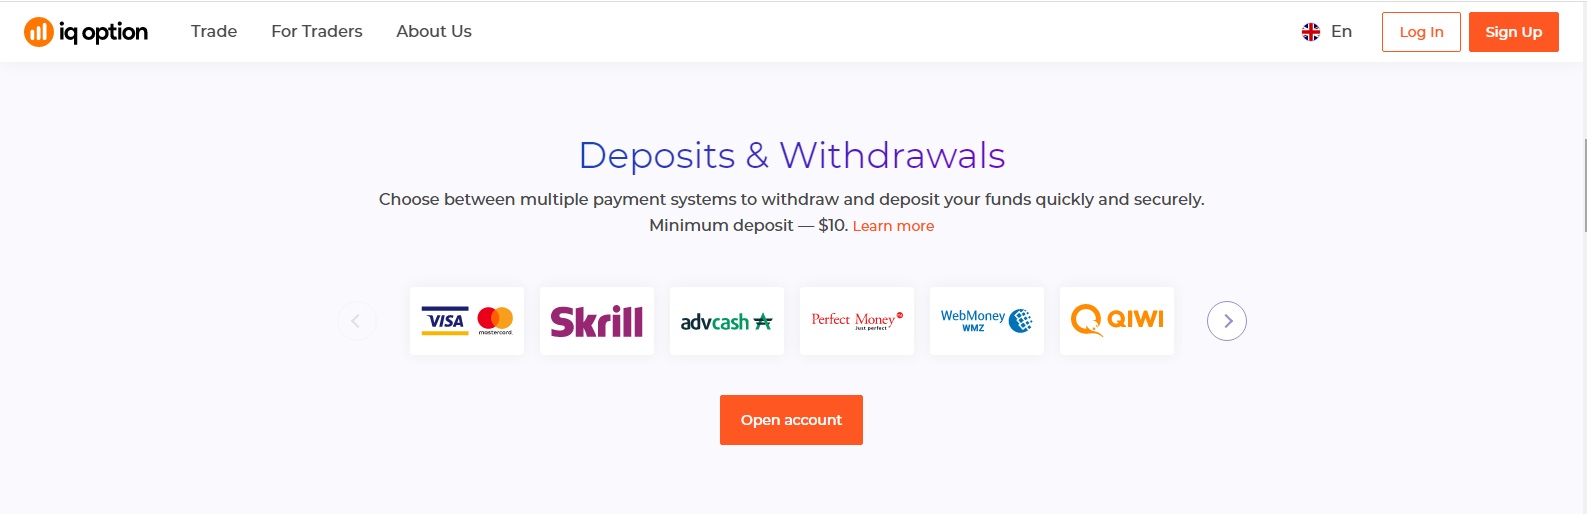 IQ Option Reviews – Deposits and Withdrawals